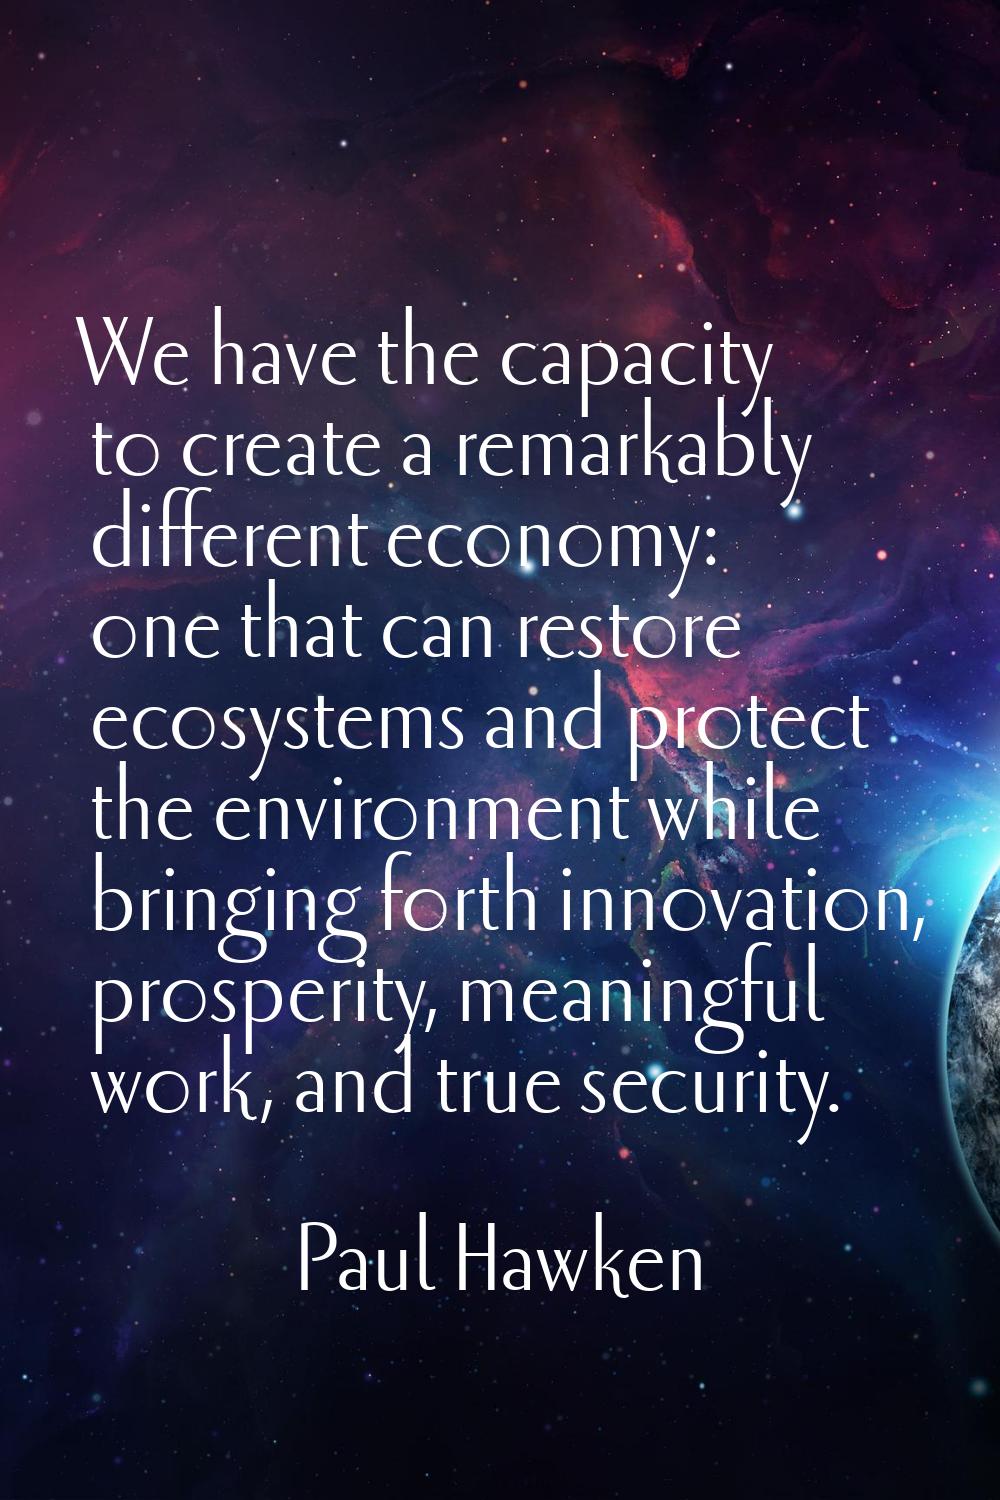 We have the capacity to create a remarkably different economy: one that can restore ecosystems and 